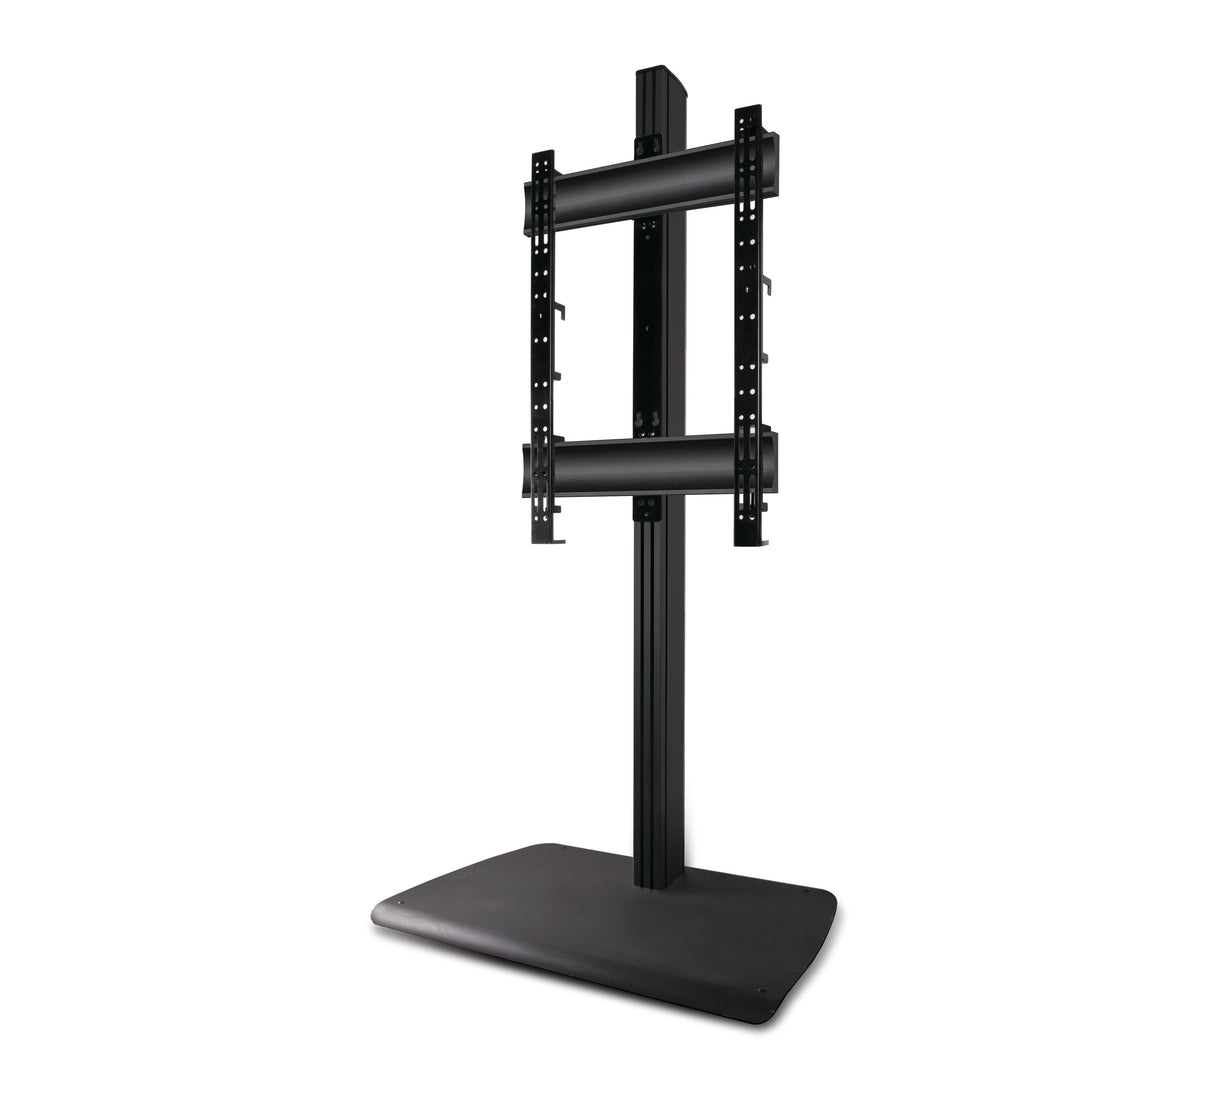 B-Tech BTF843 Portrait Digital Signage TV Stand for Screens up to 85 inches